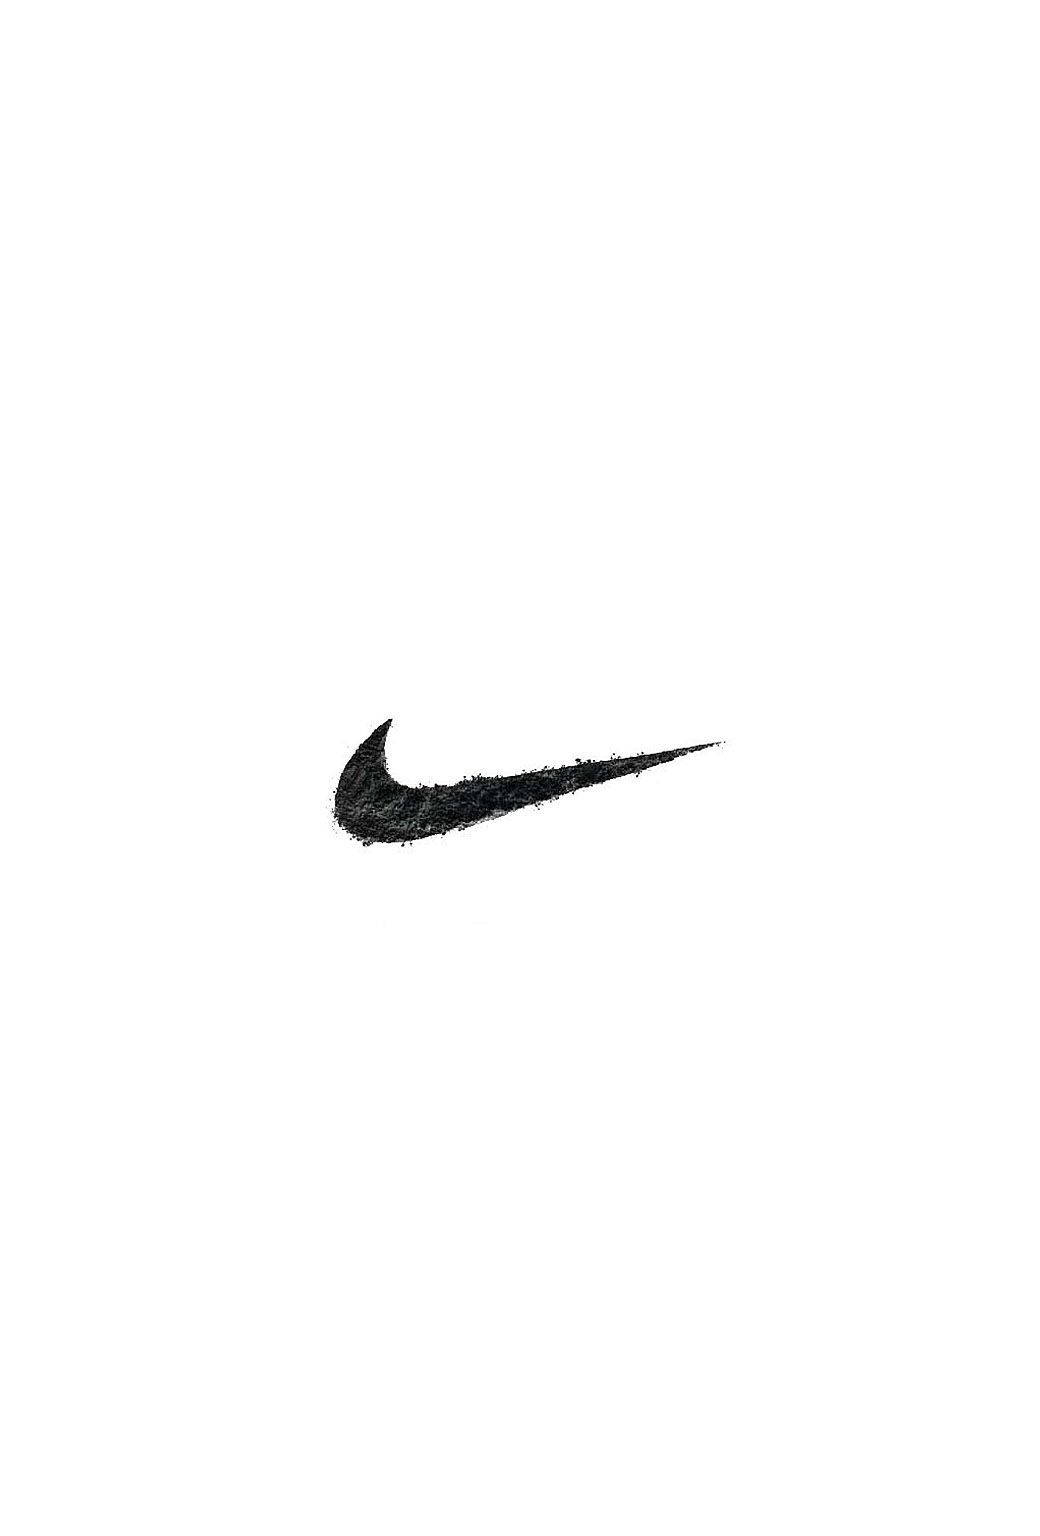 White With Nike Logo Iphone Wallpaper